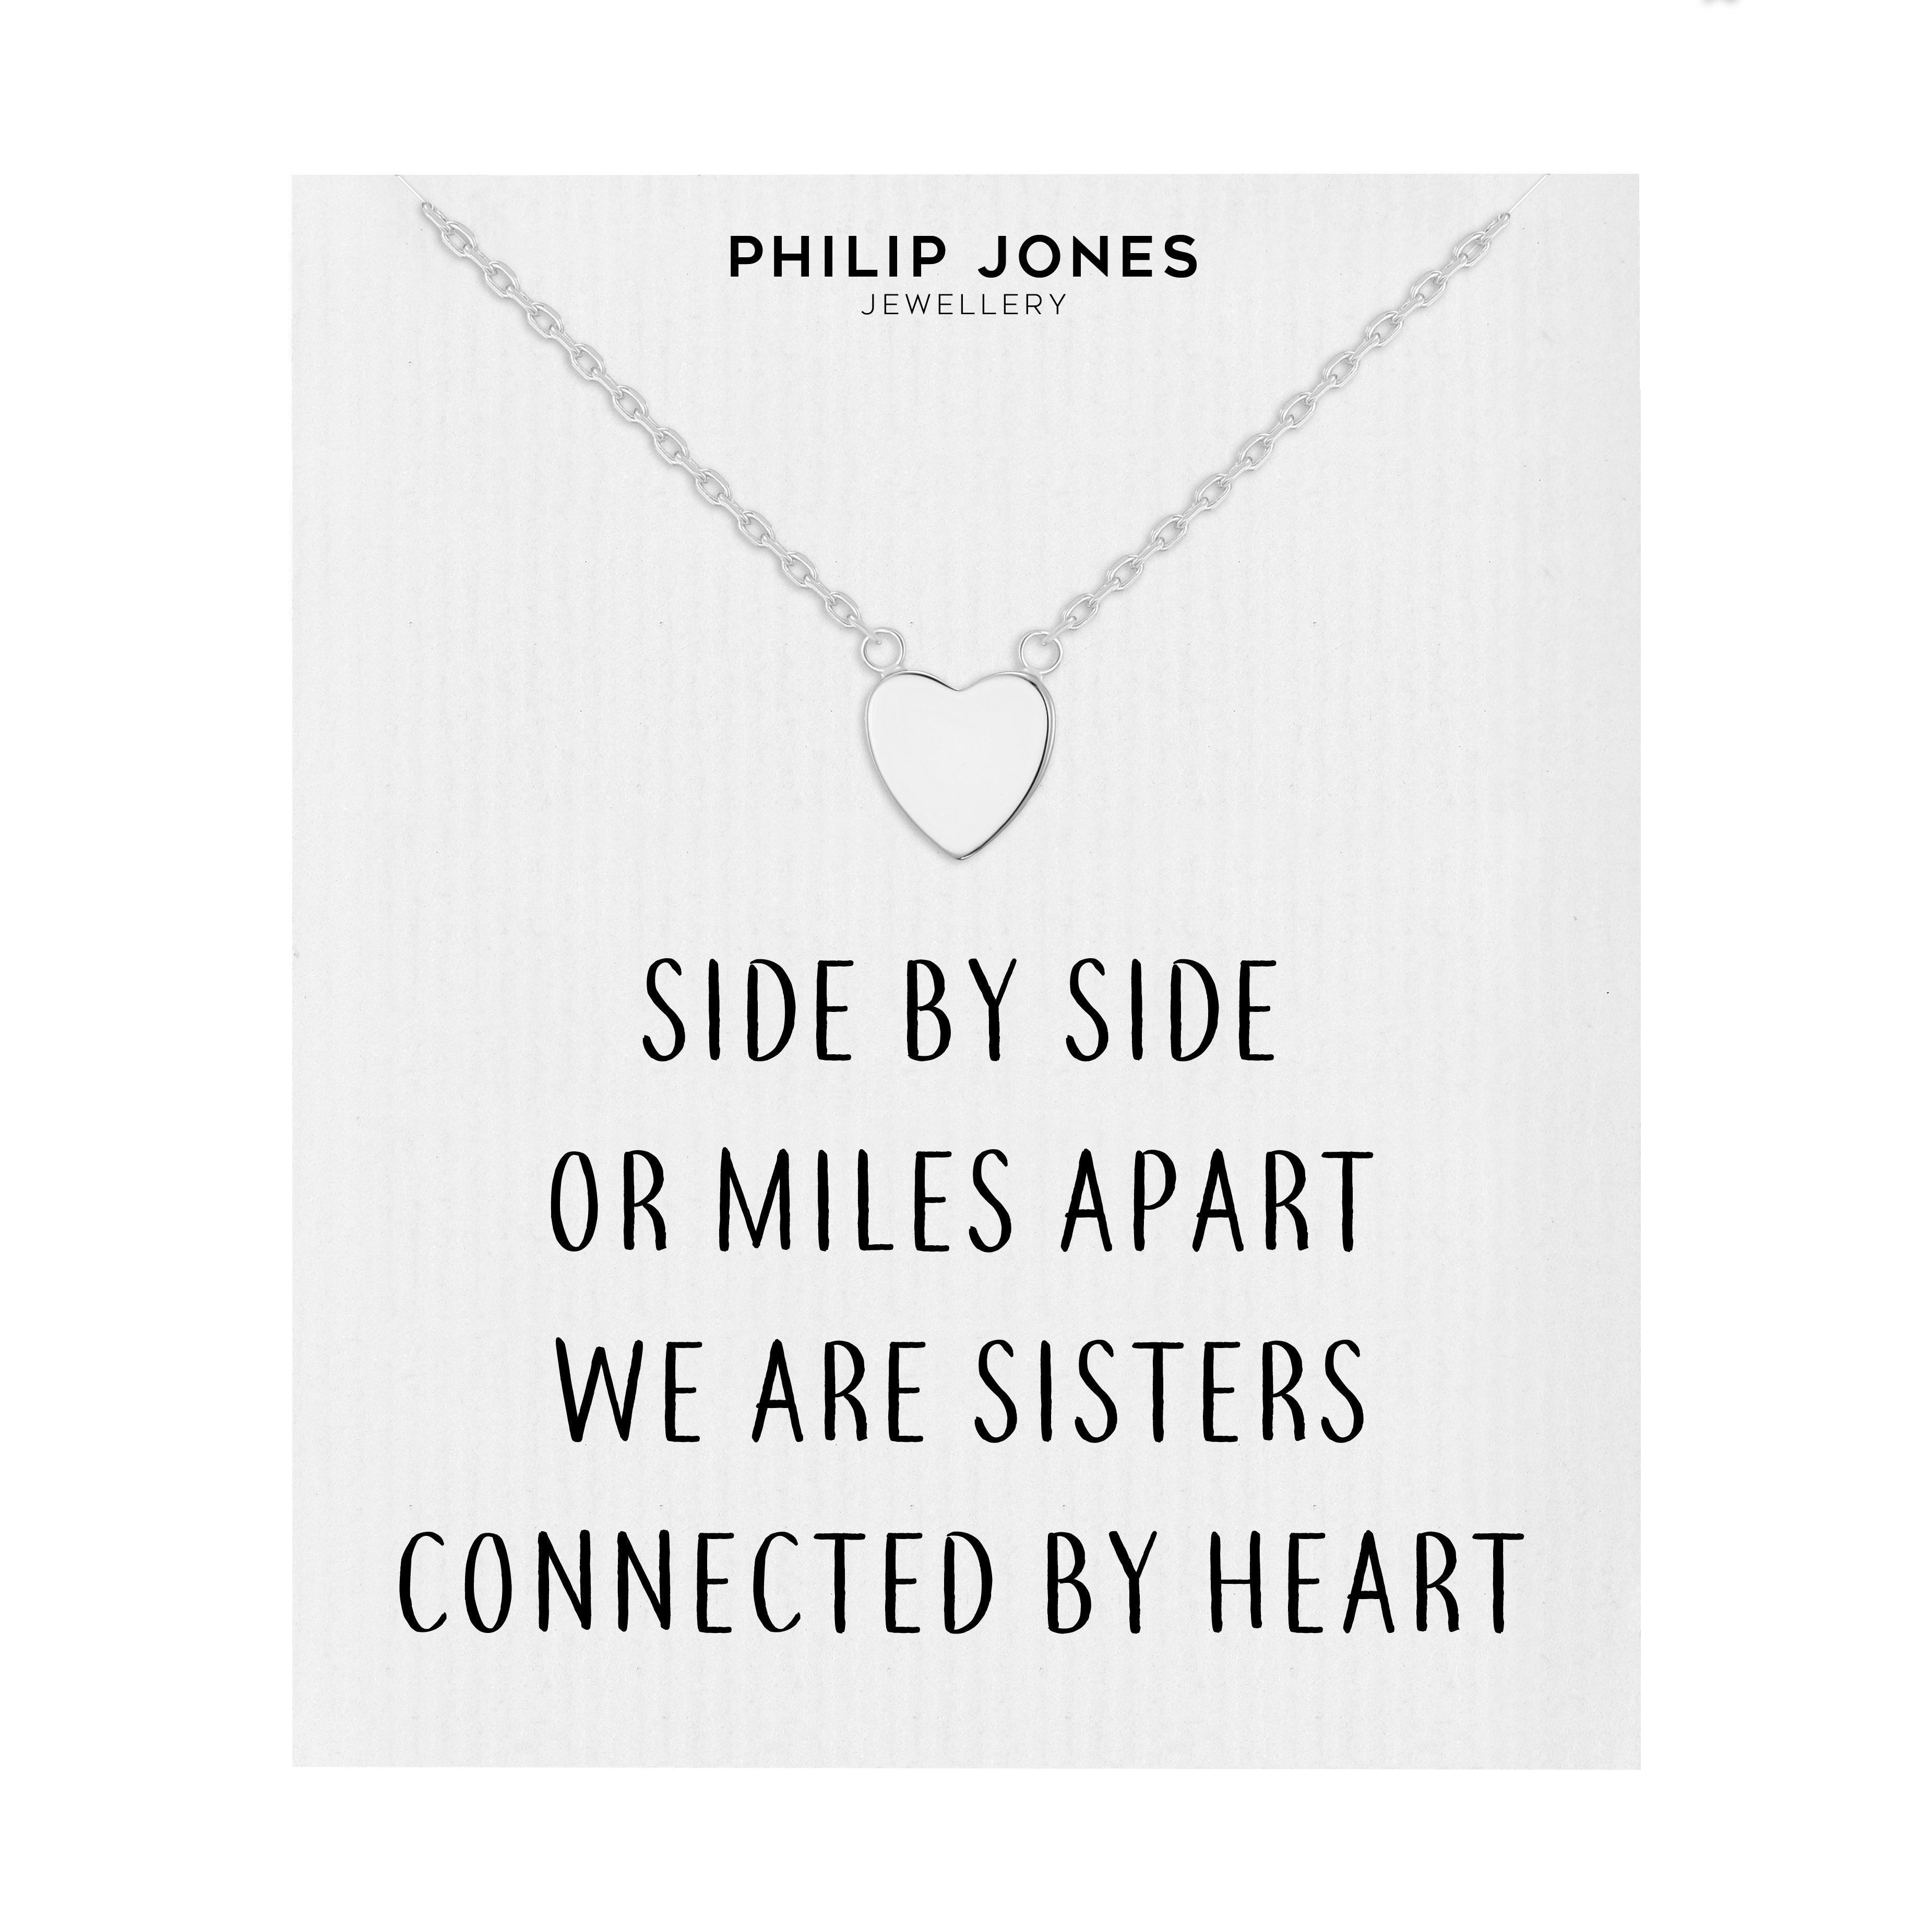 Silver Plated Sister Heart Necklace with Quote Card by Philip Jones Jewellery